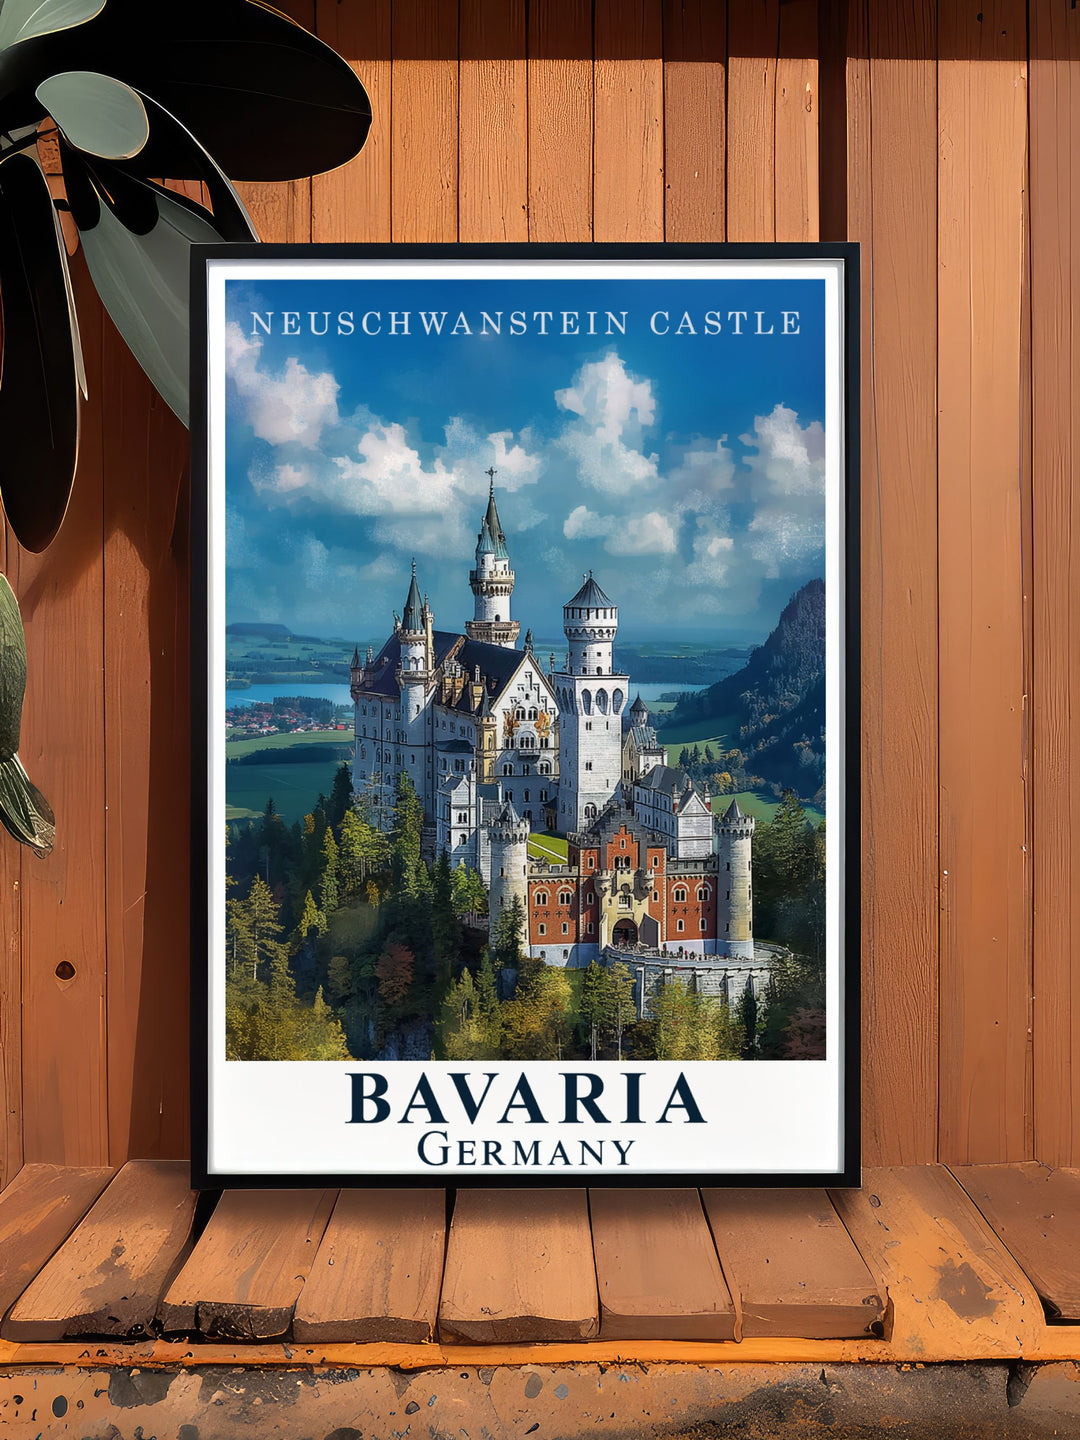 Timeless Neuschwanstein Castle wall art is more than just decoration. This piece serves as a conversation starter and a reflection of your taste bringing history and wonder into your home.